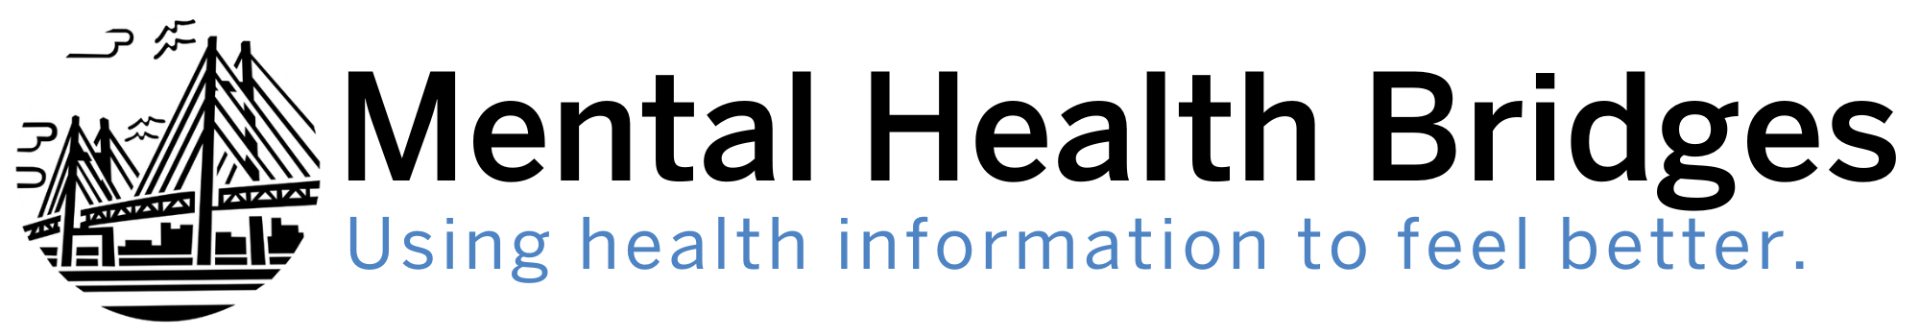 Mental Health Bridges Logo with the words "Mental Health Bridges: Using health information to feel better."